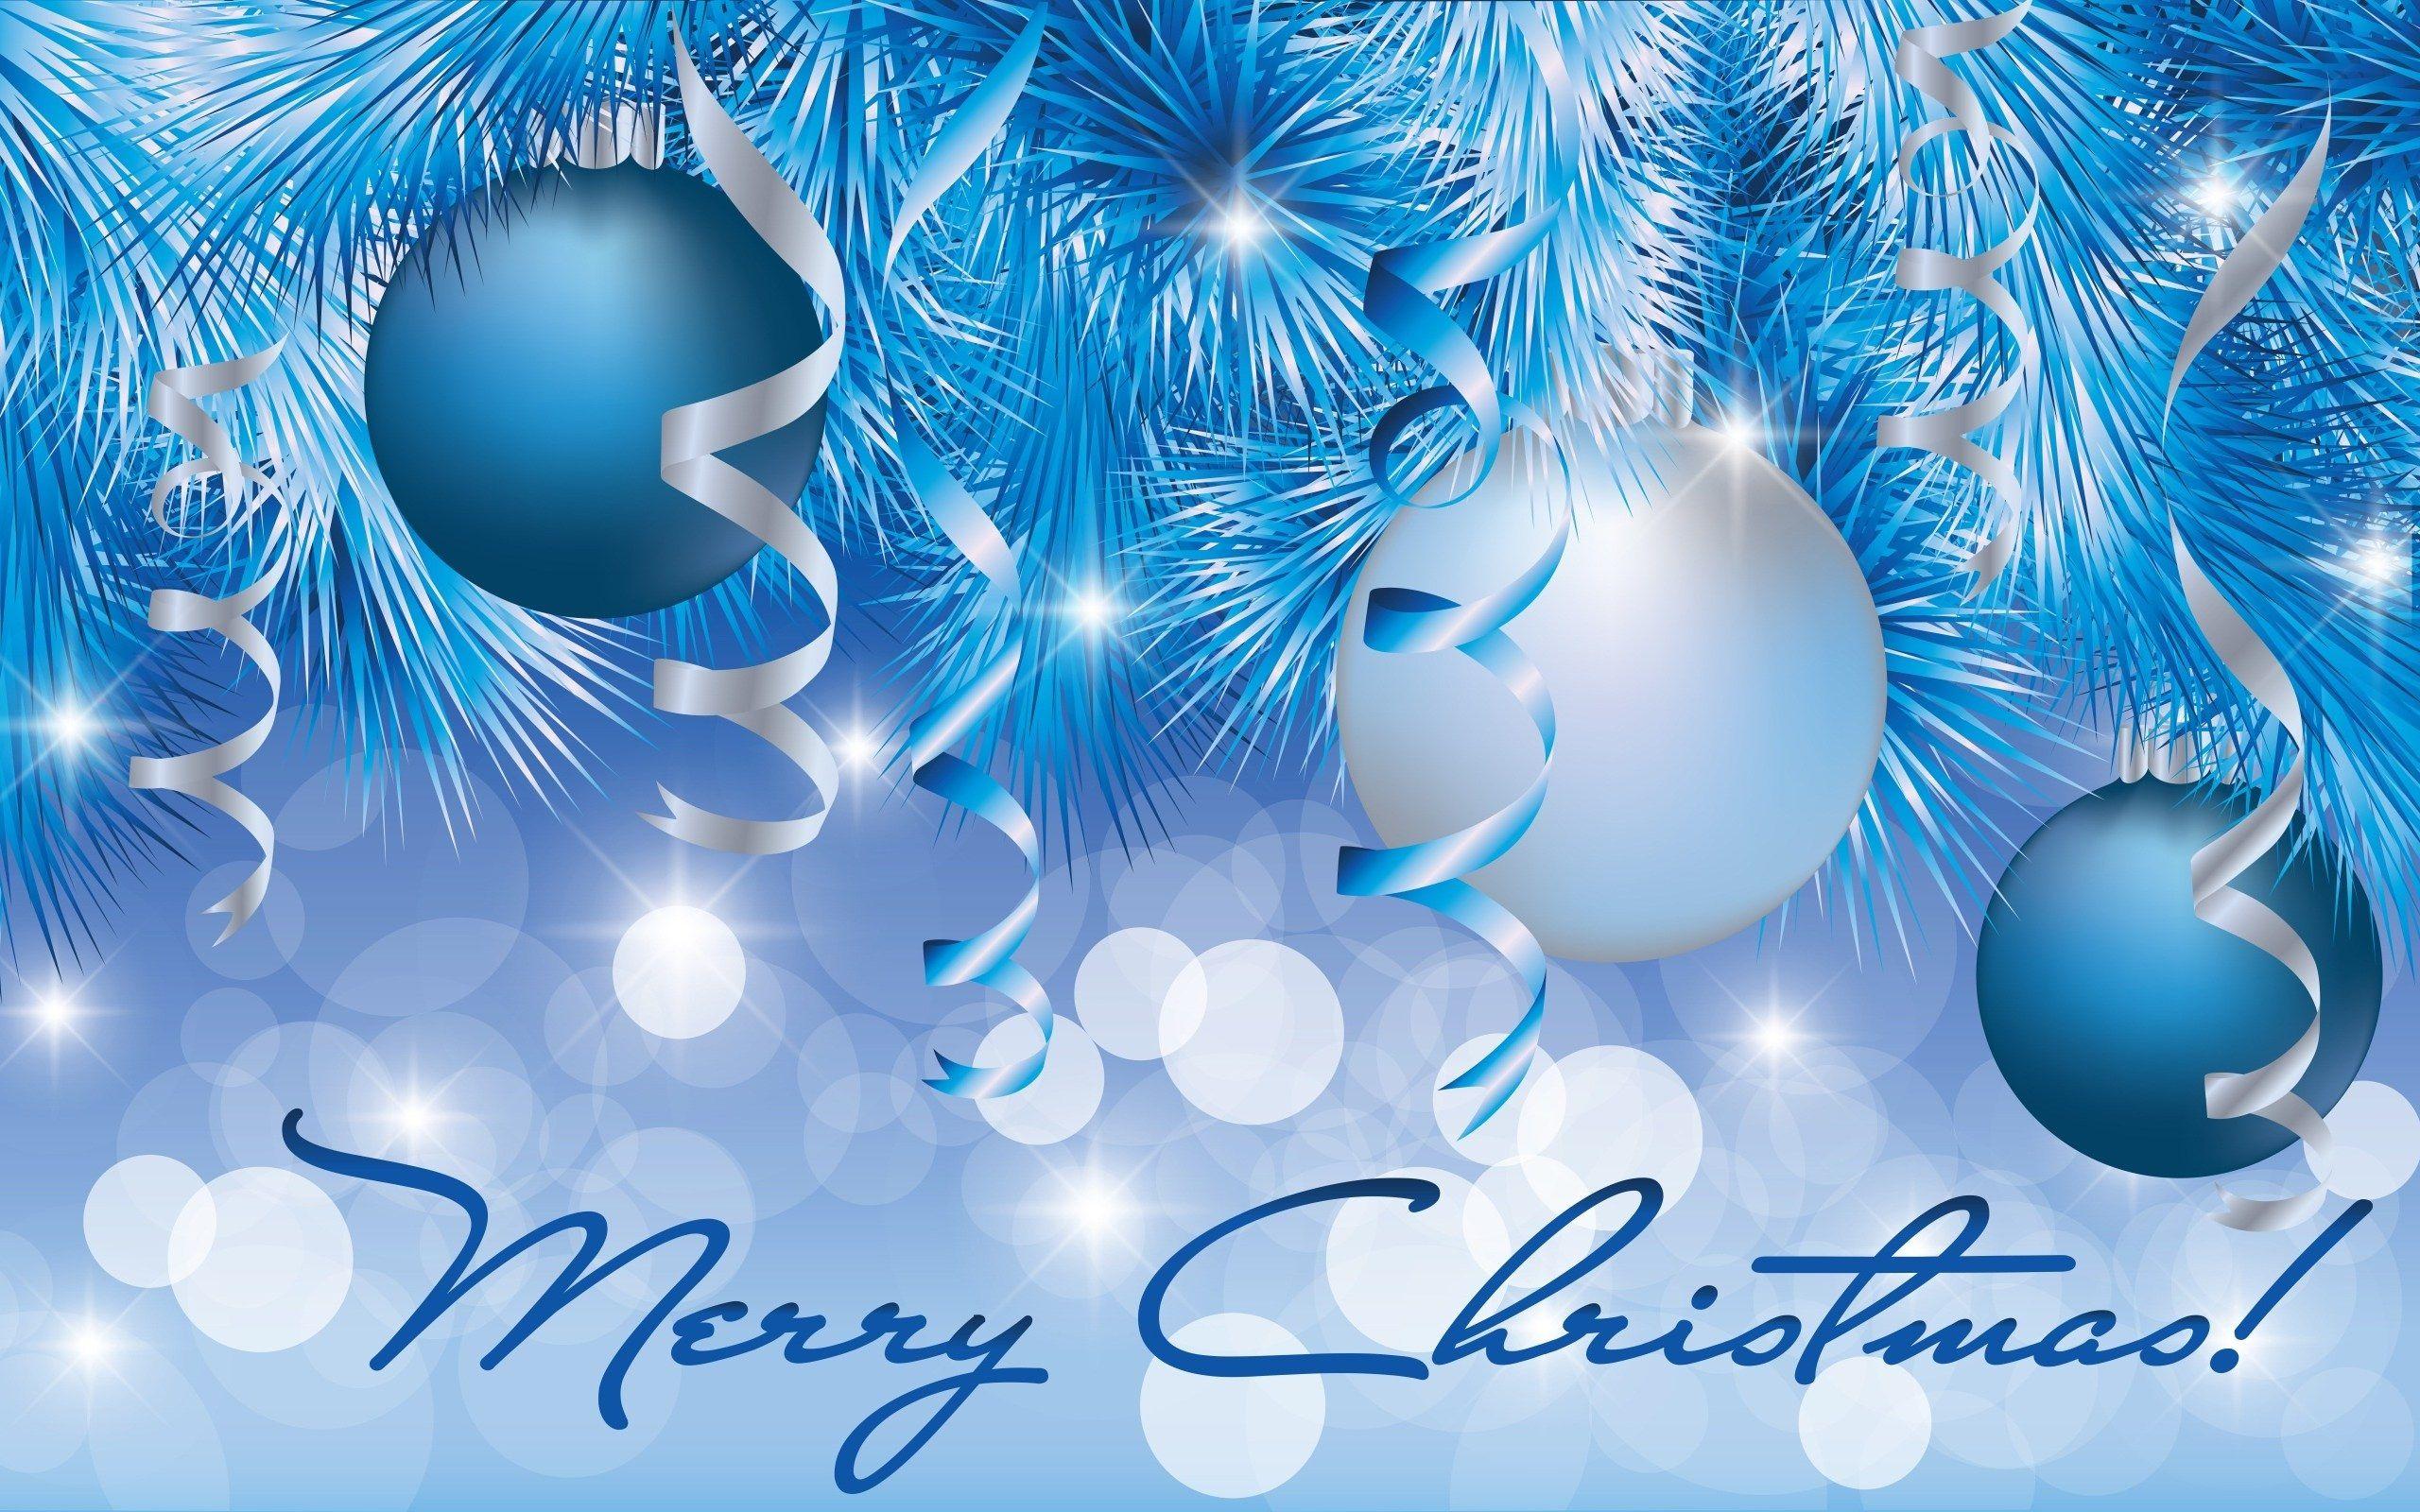 Blue And Silver Christmas wallpaper. Silver christmas wallpaper, Merry christmas wallpaper, Christmas wallpaper background